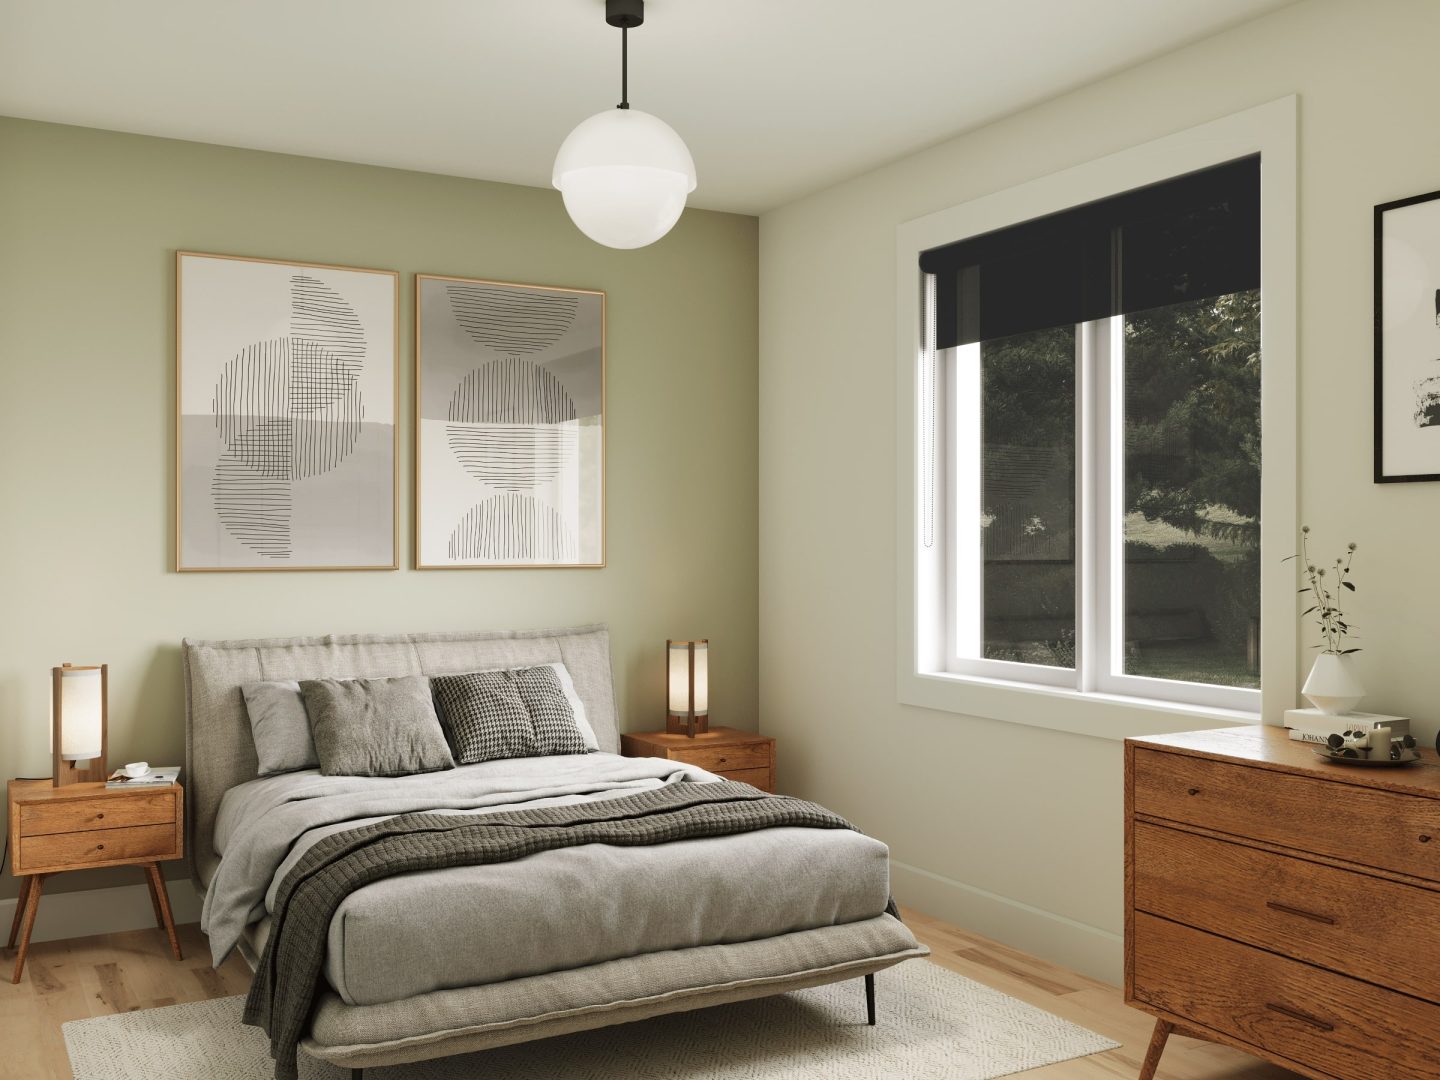 The Svalla model is a midcentury-style chalet. View of the secondary bedroom.